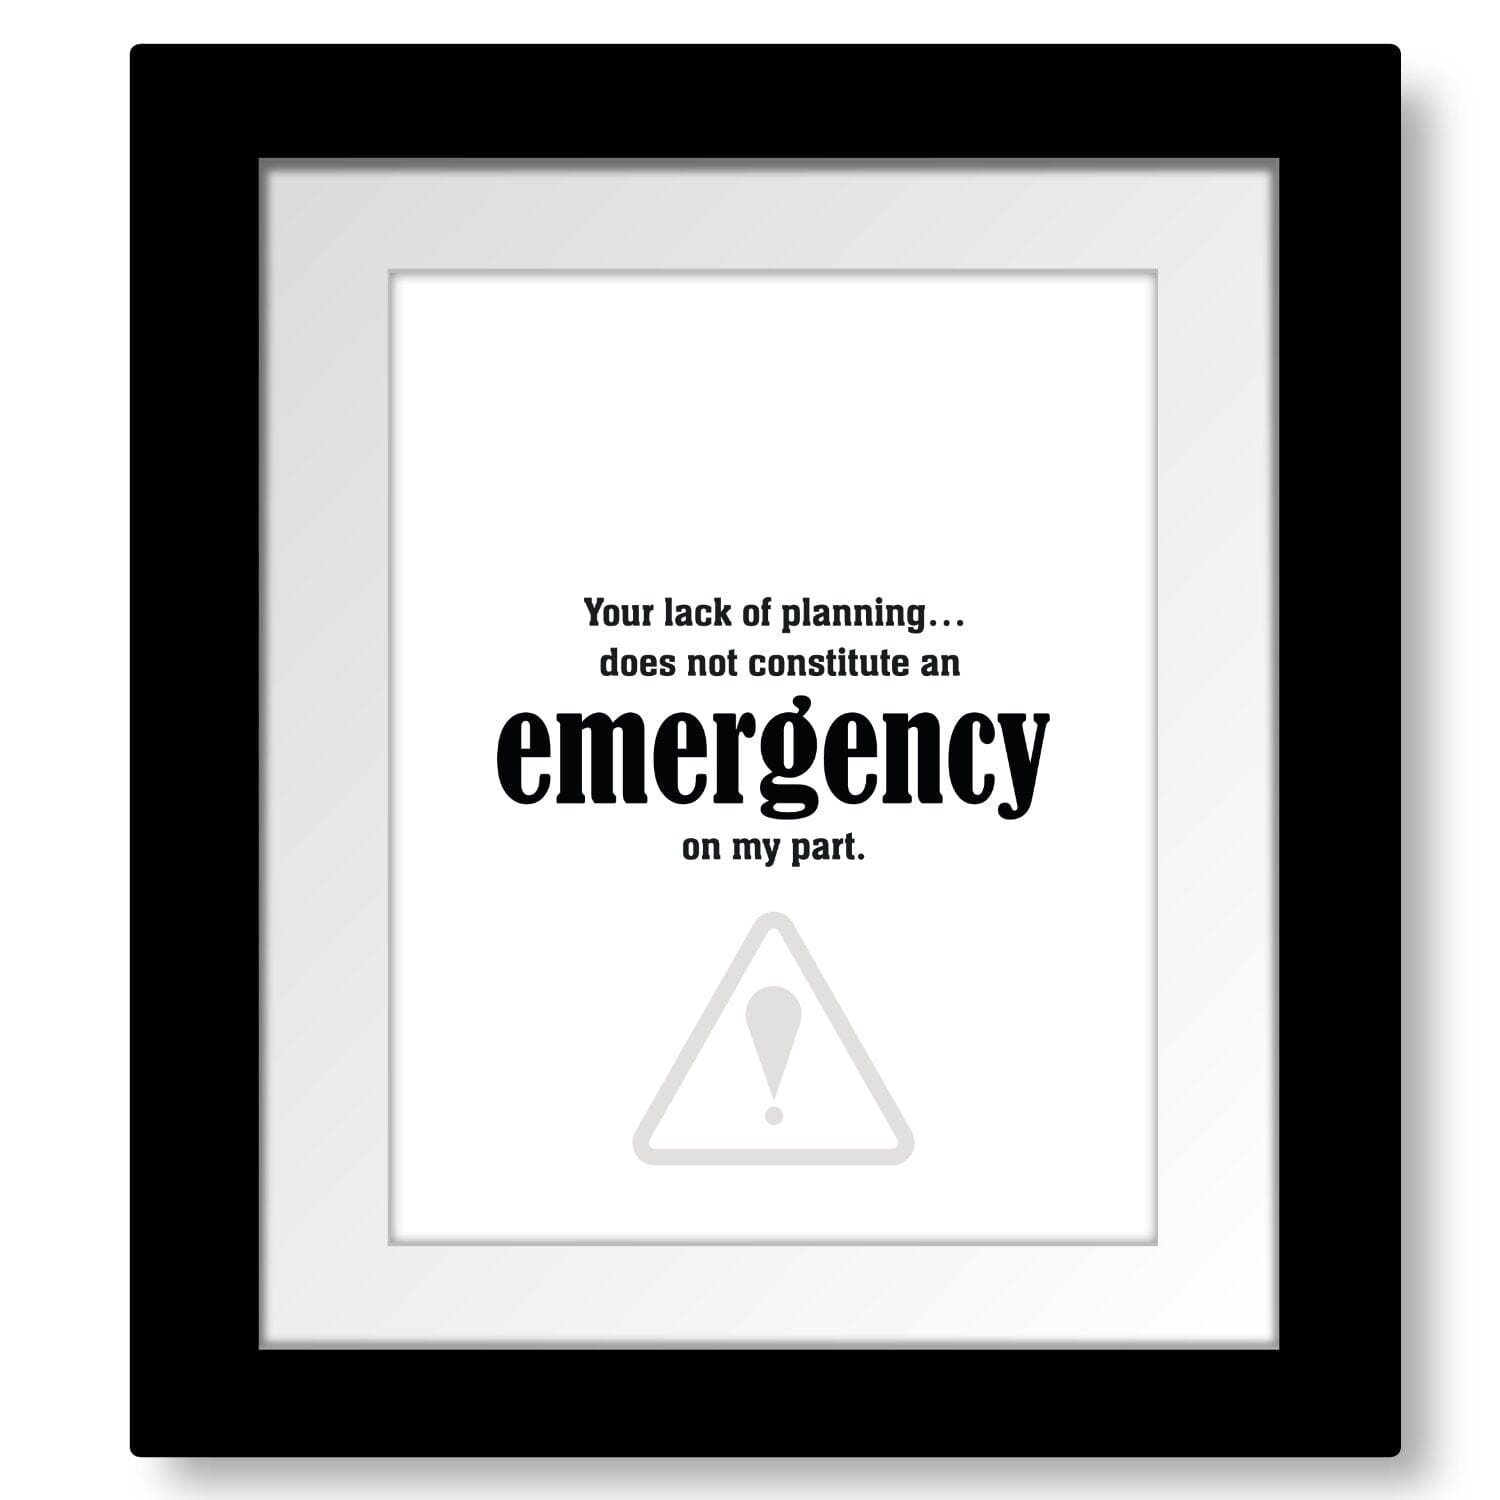 Your Lack of Planning Does Not Constitute an Emergency Wise and Wiseass Quotes Song Lyrics Art 8x10 Framed and Matted Print 